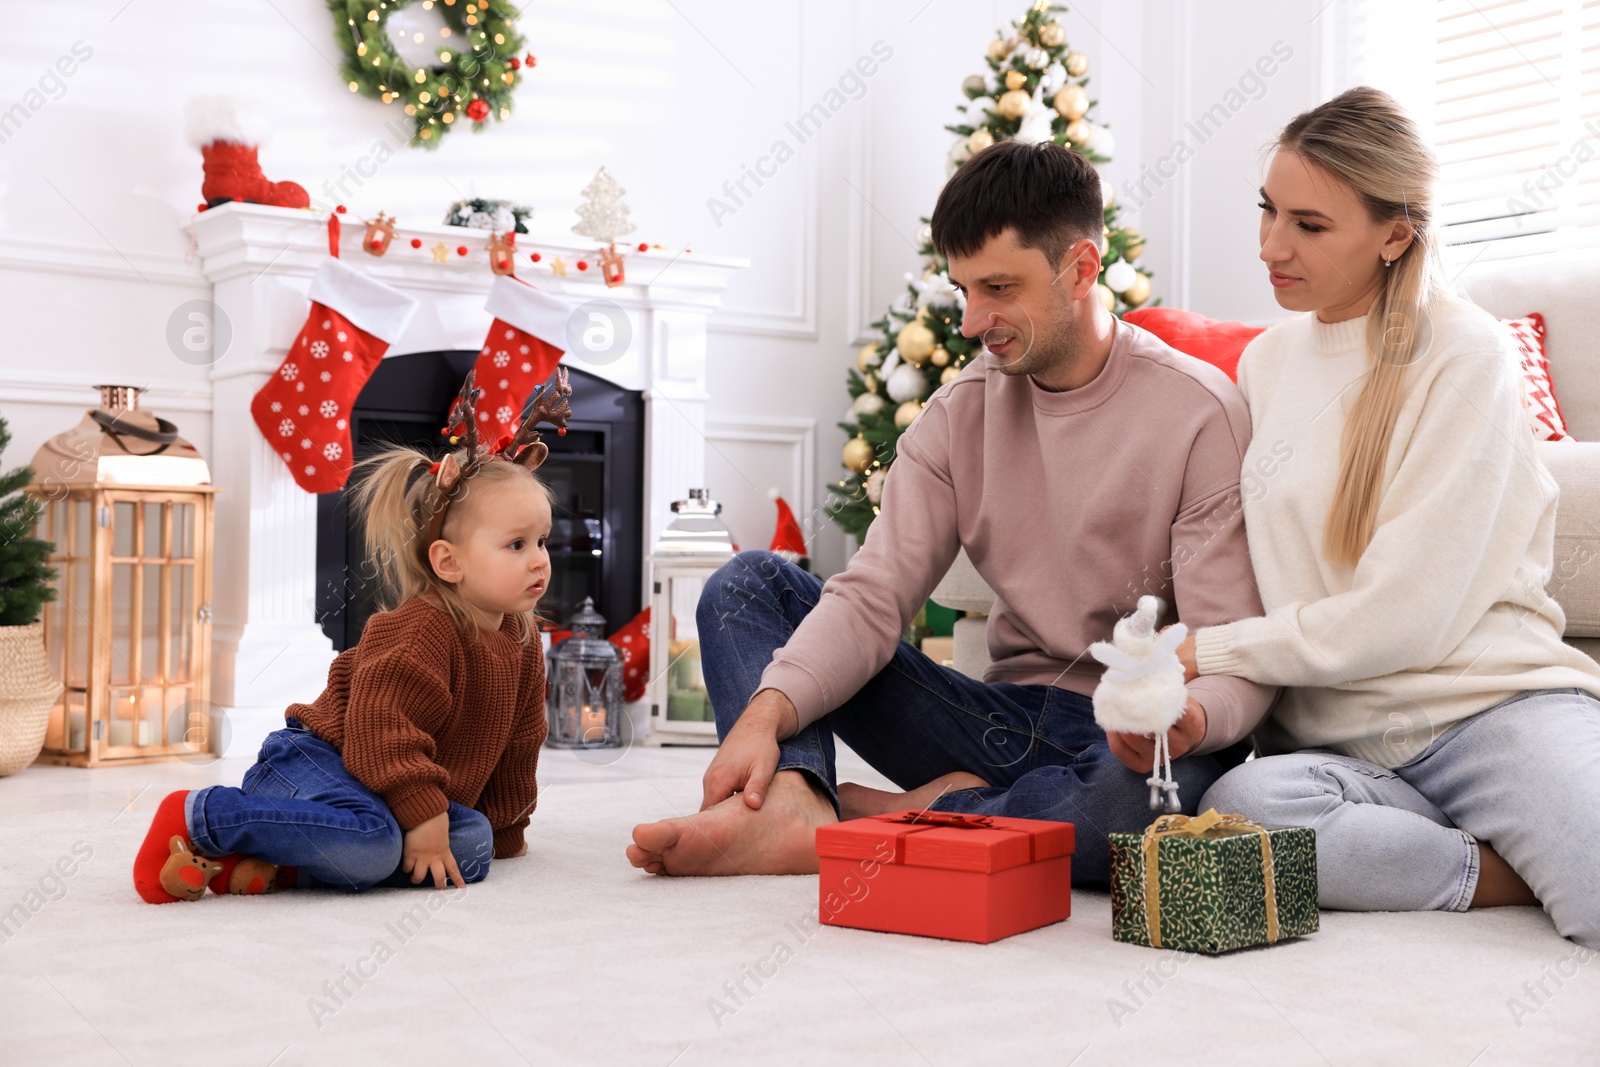 Photo of Happy family with gifts in room decorated for Christmas